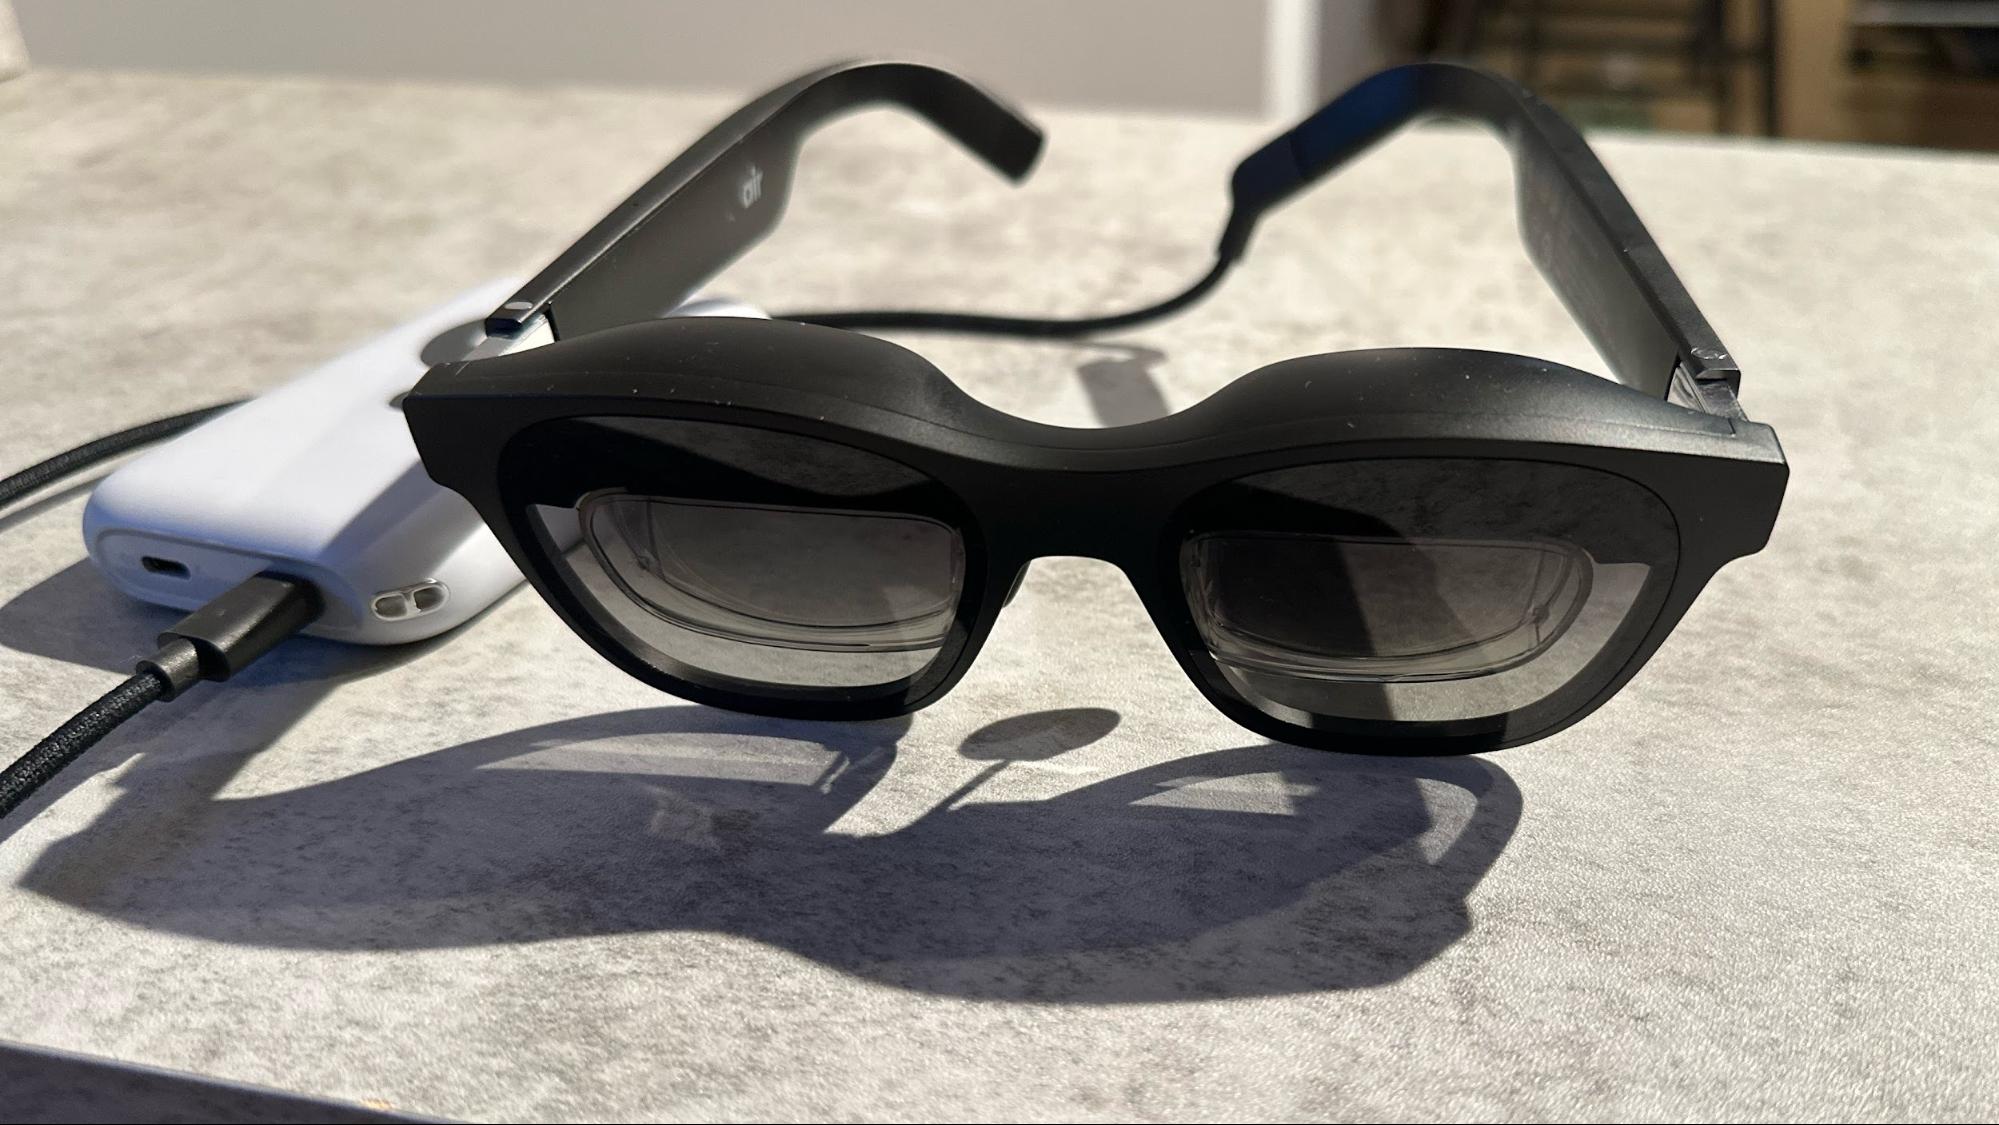 Xreal Beam Review: Air AR Glasses Go Wireless | Tom's Hardware